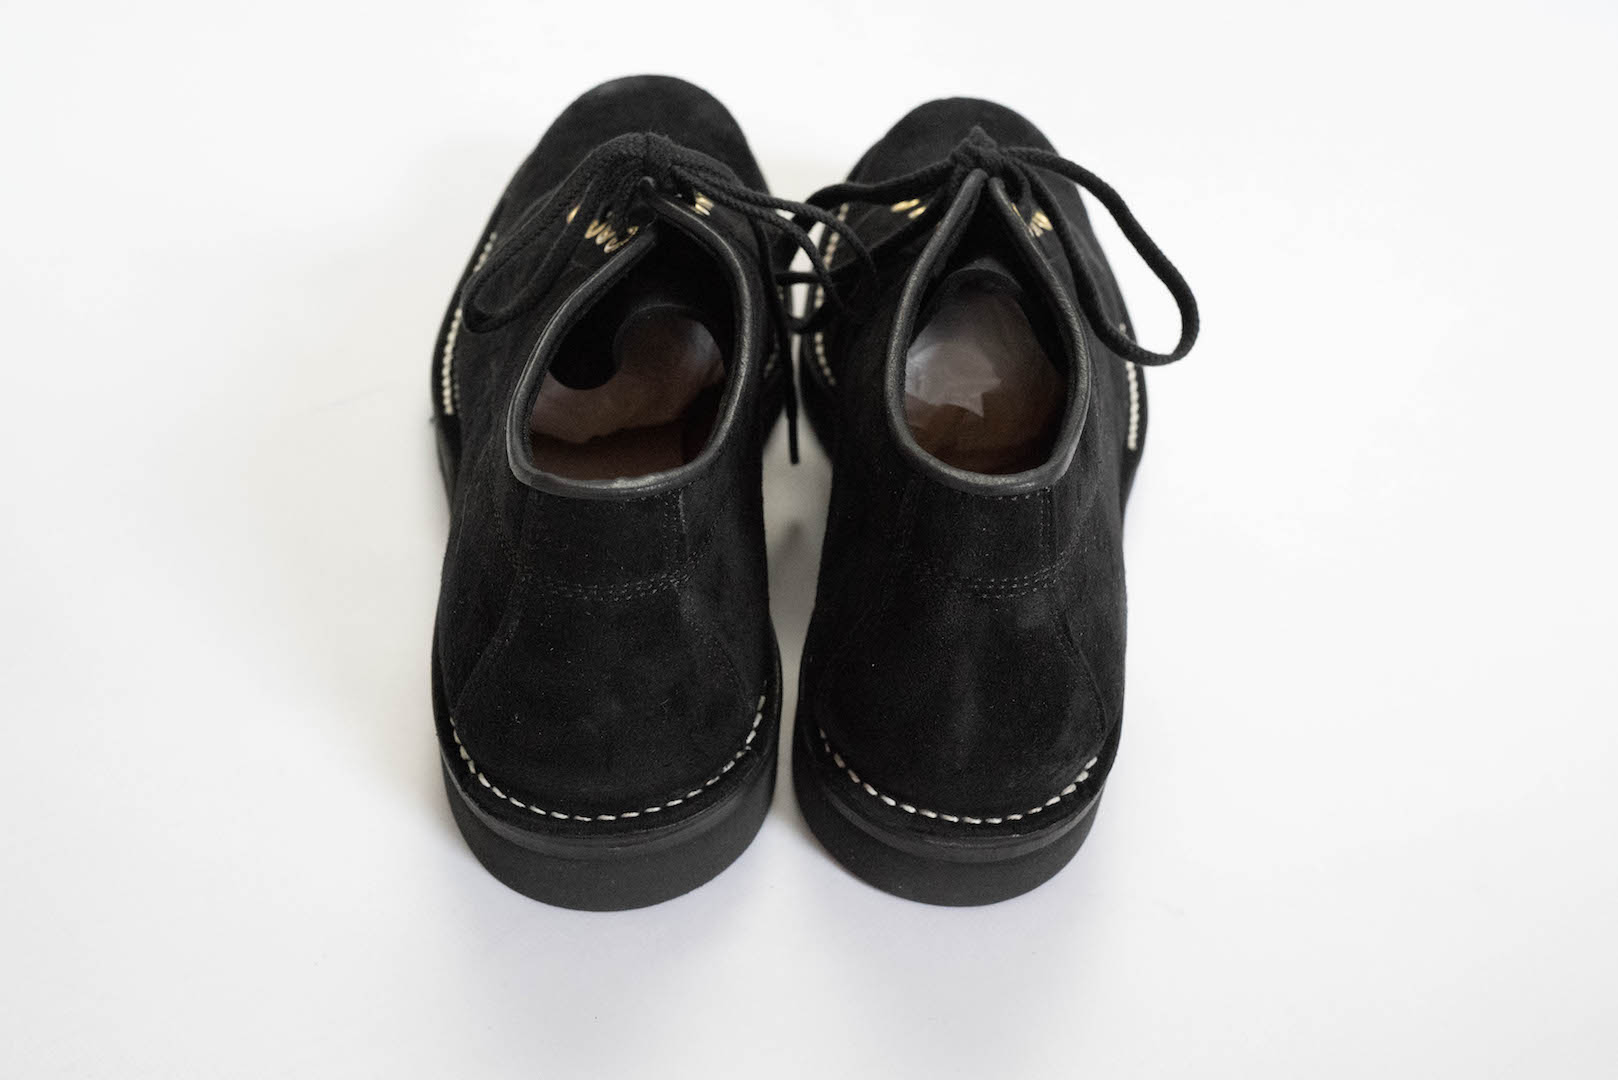 The Flat Head 'Kudu' Suede Oxford Shoes (Black)